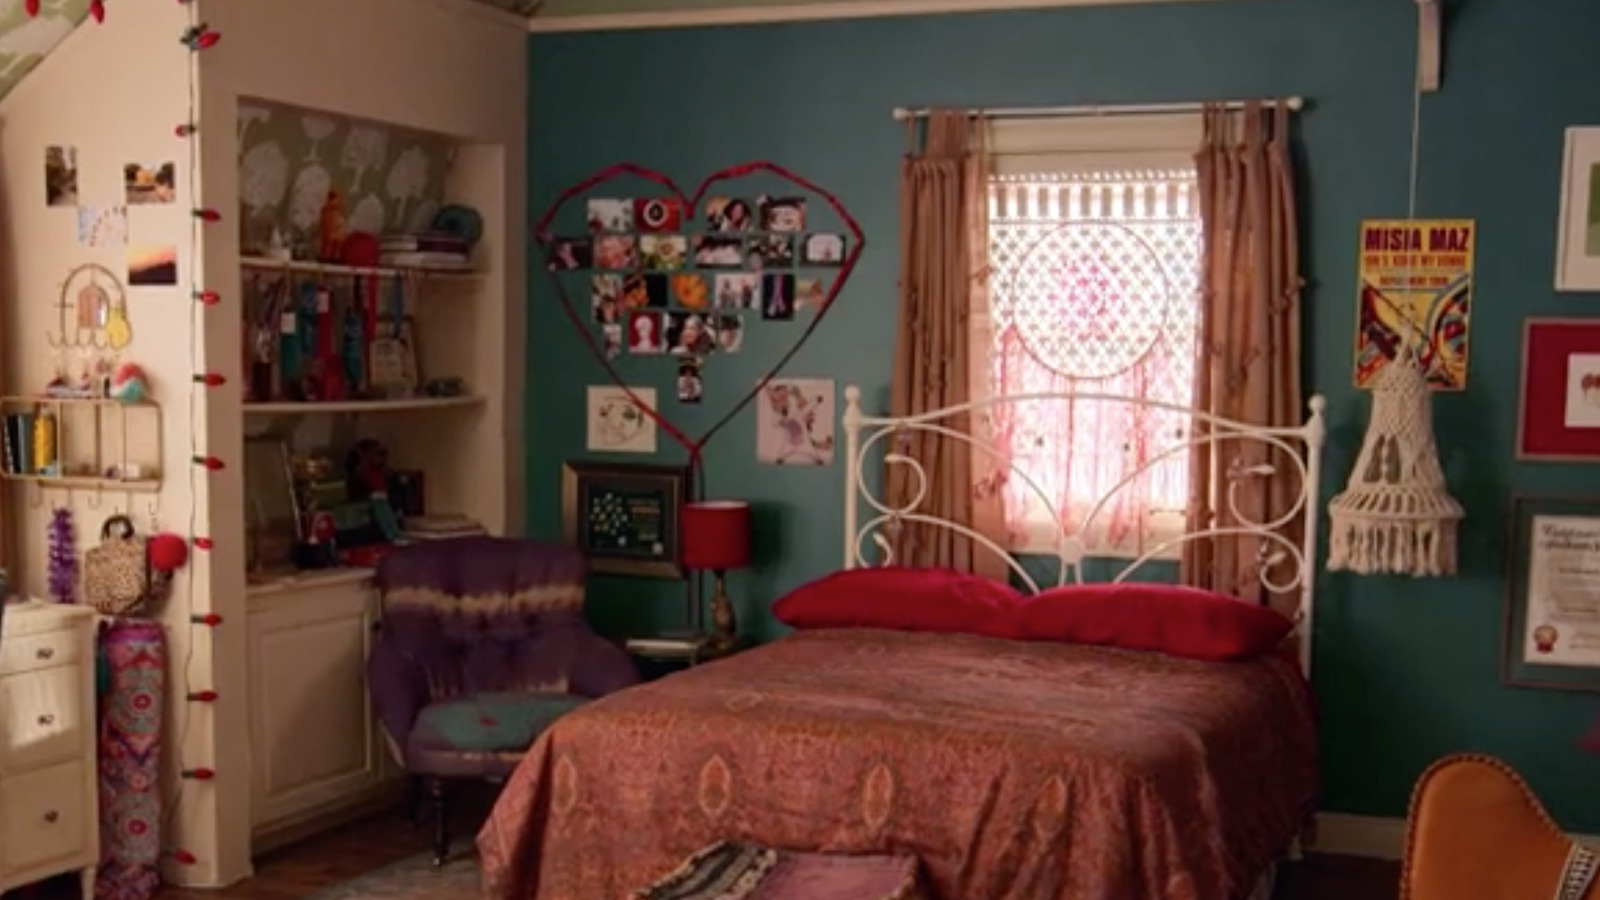 How To Decorate Your Home Like Devi's Bedroom In Never Have I Ever